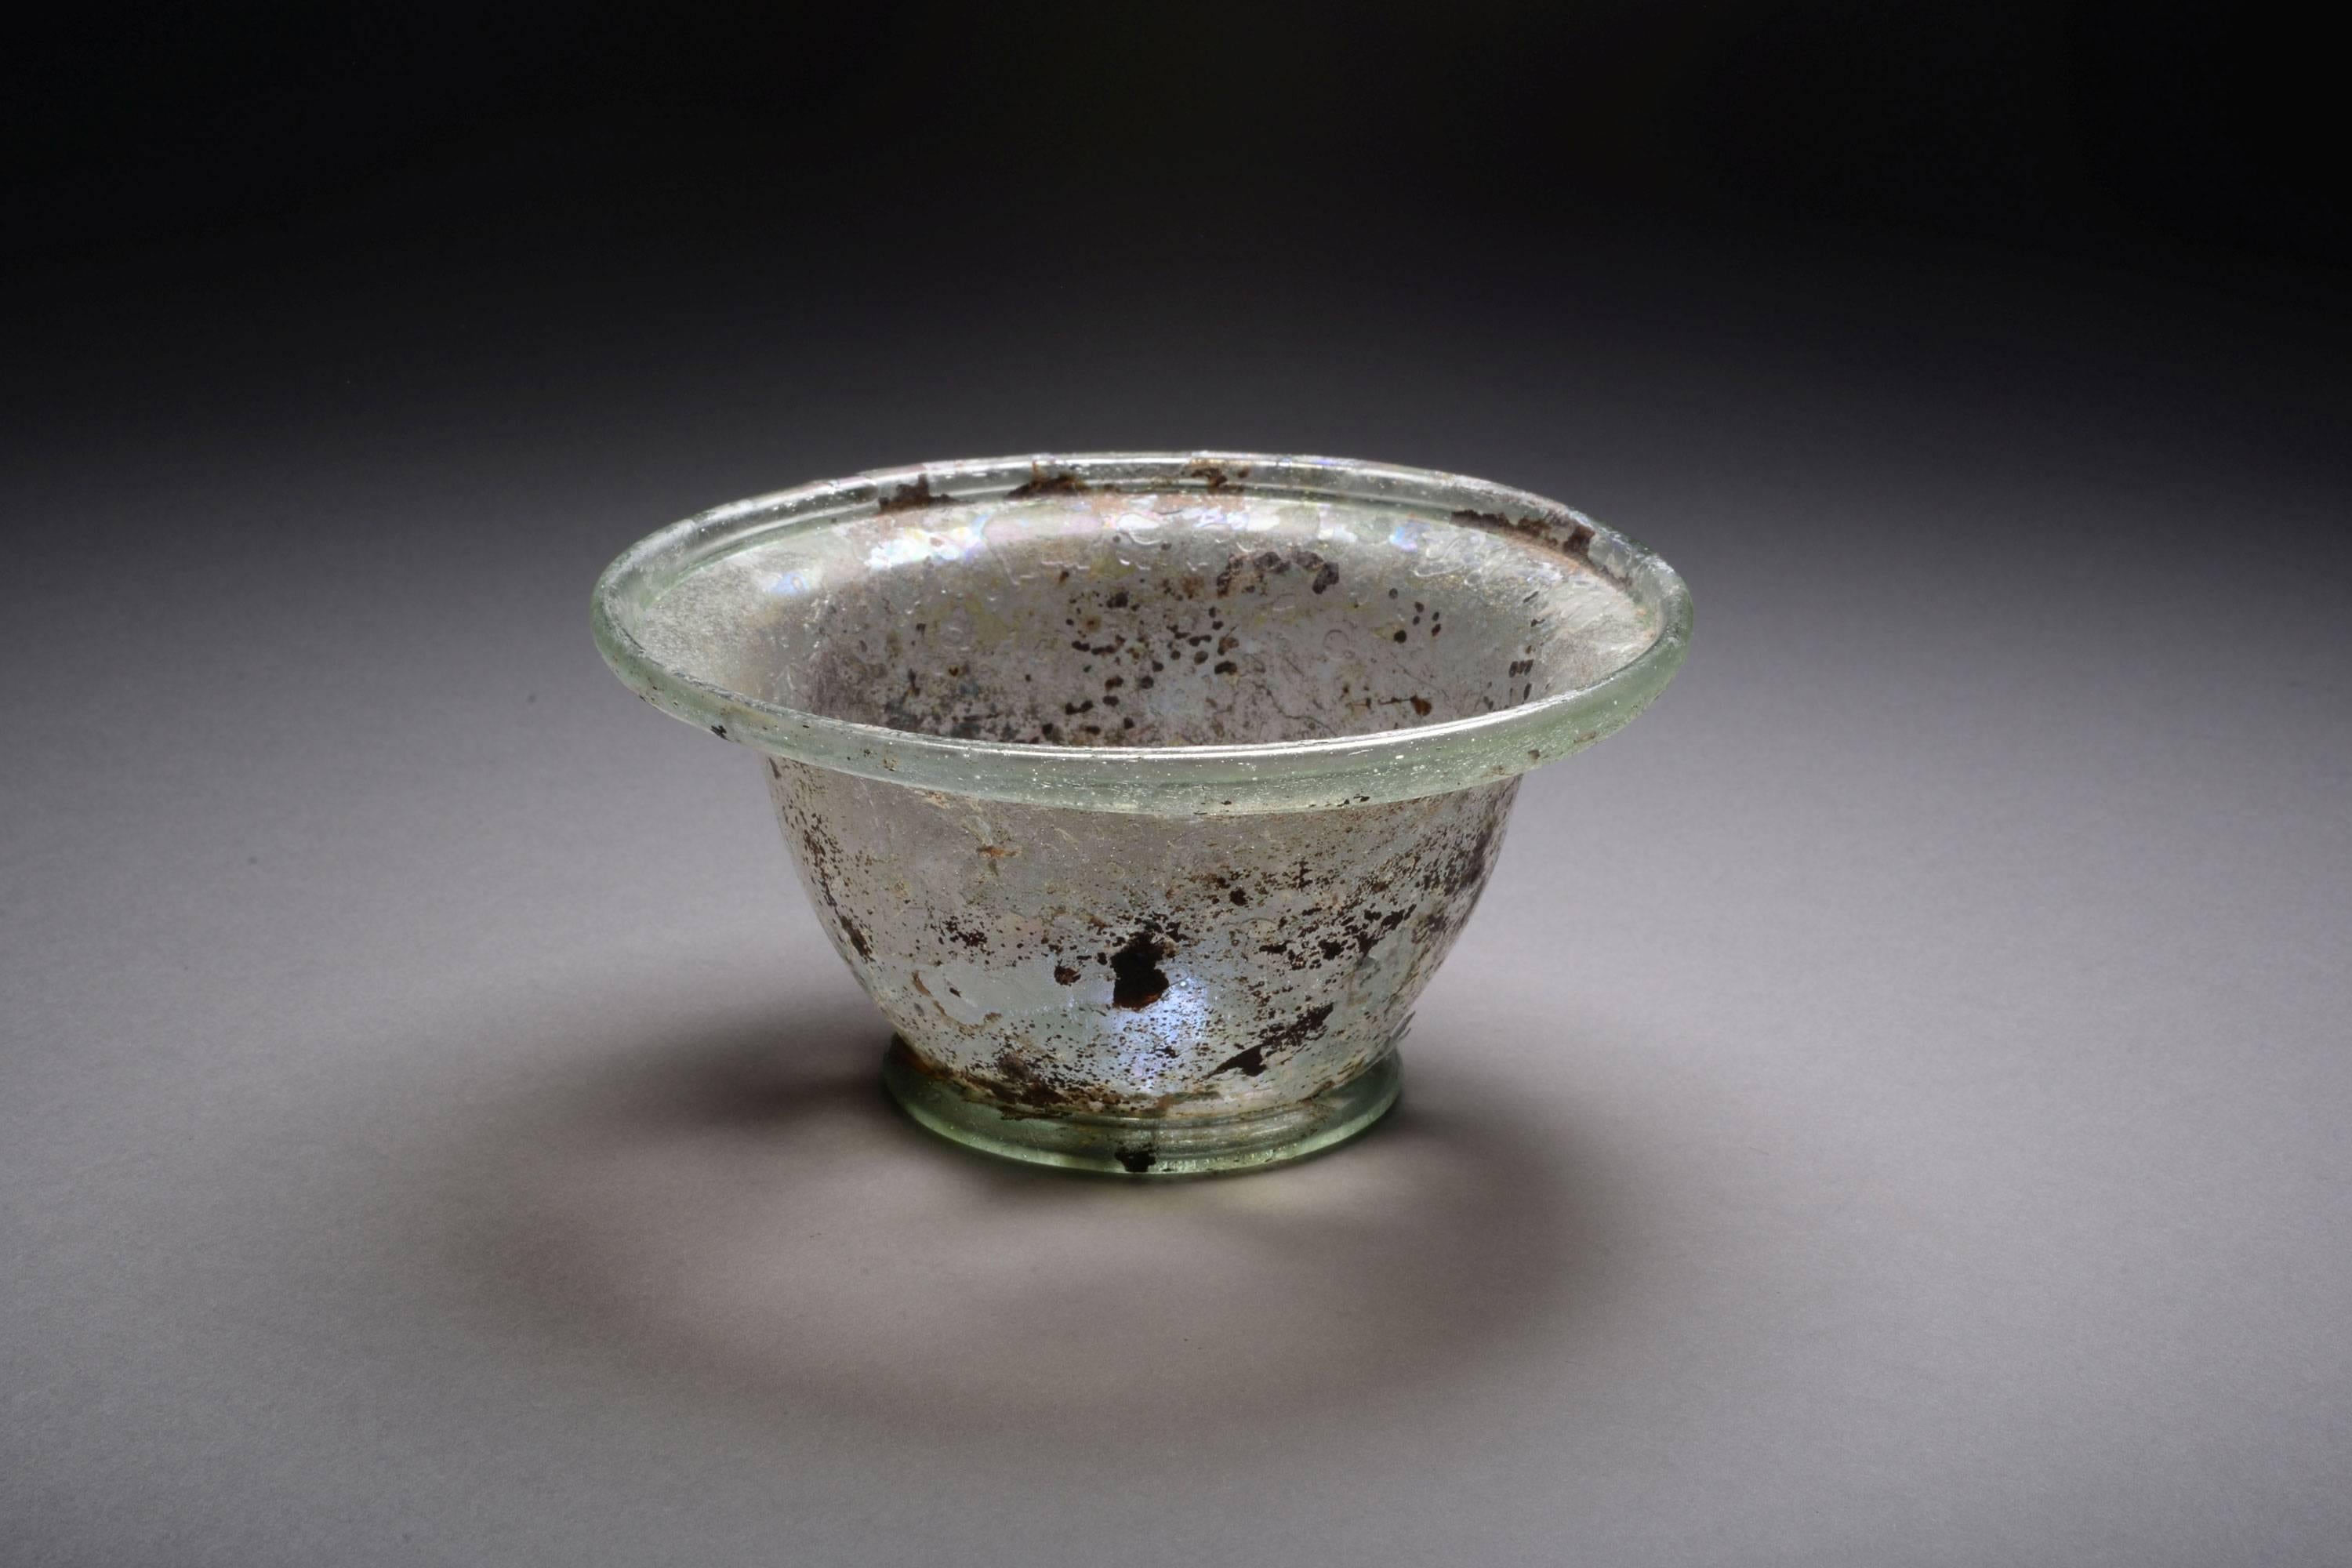 An ancient Roman glass patella cup, dating to the 2nd – 3rd century AD.

Free blown of beautiful light blue glass, the bowl hemispherical, rim outsplayed, with a flattened tubular lip made by folding up and down, sitting upon a ring base with a